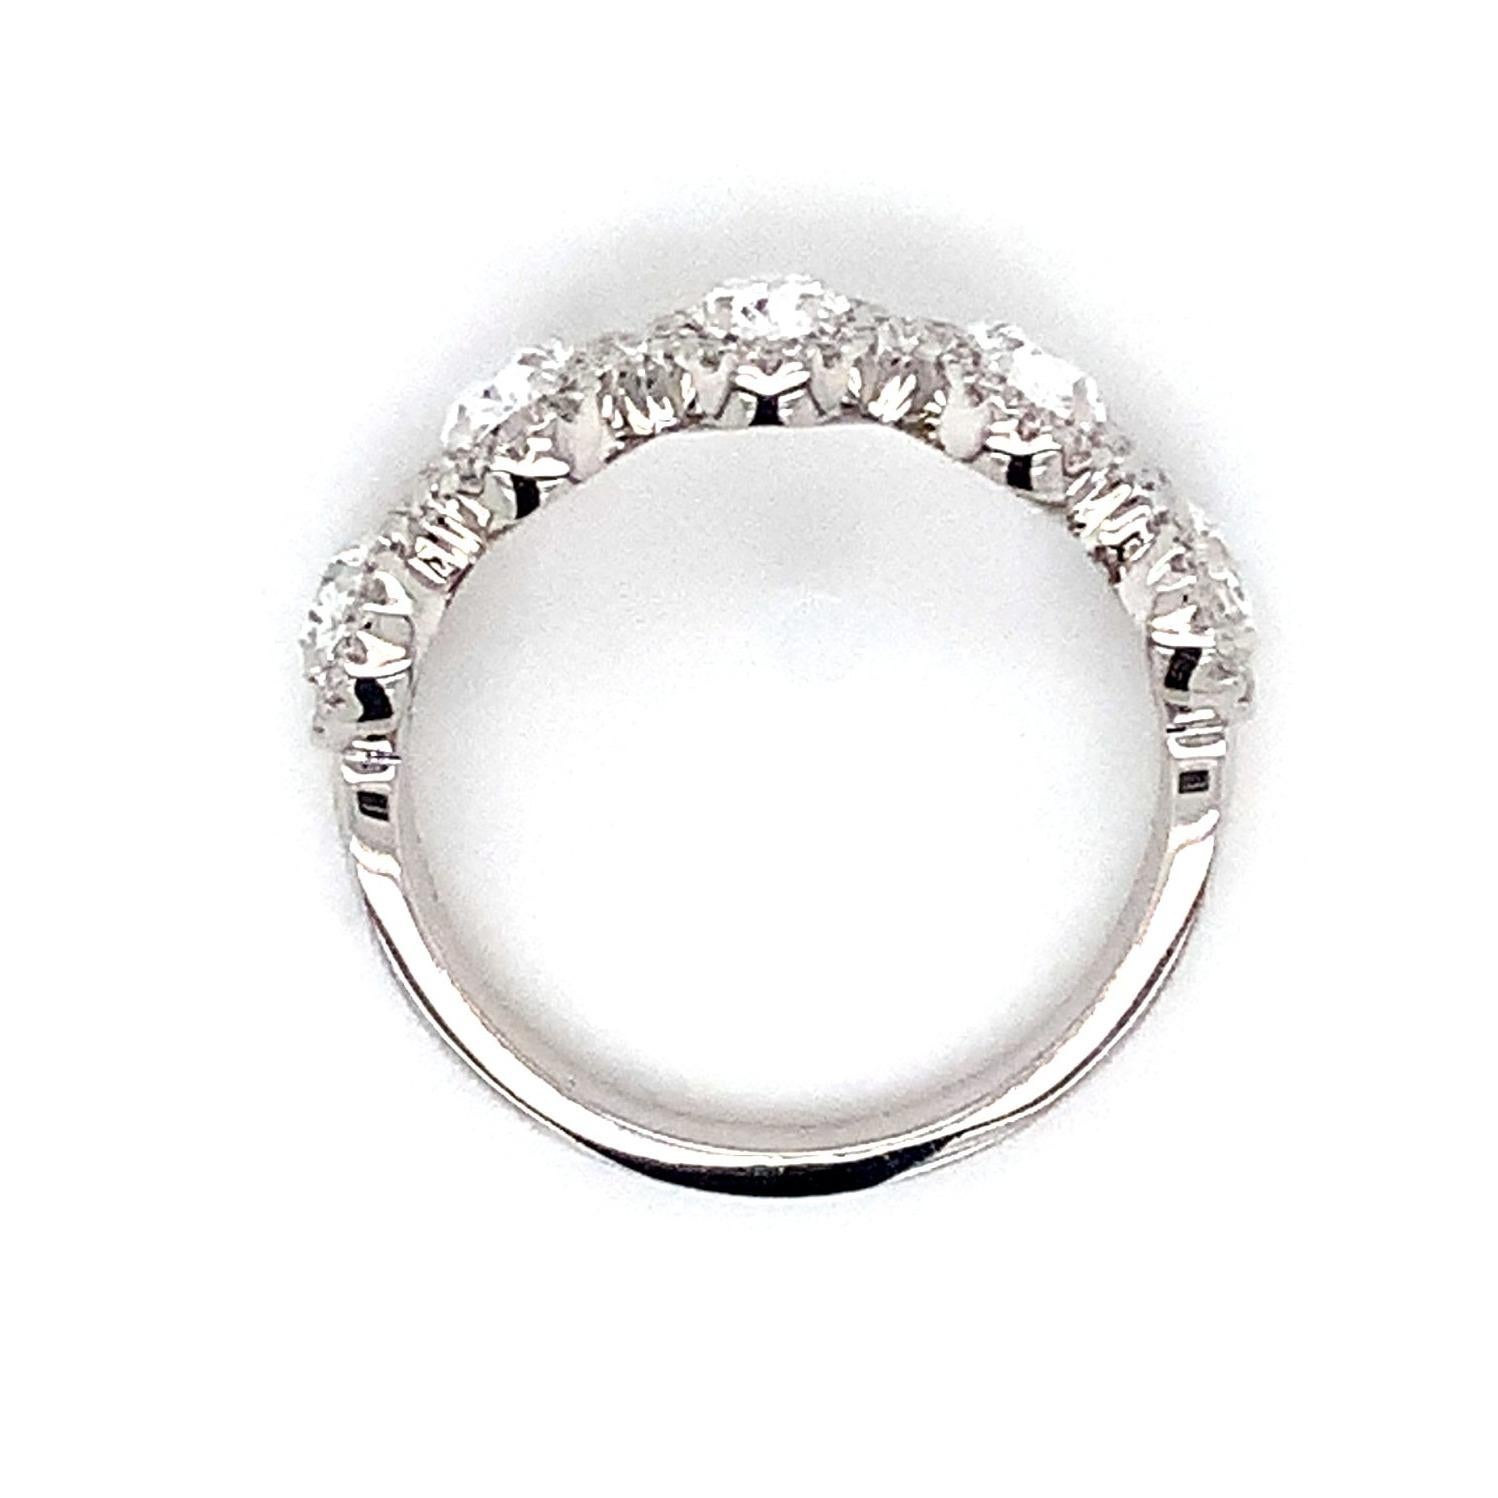 Modern Roman + Jules 5 Stone Oval Shape Diamond Halo Band Set in Platinum 1.77cts T.W For Sale